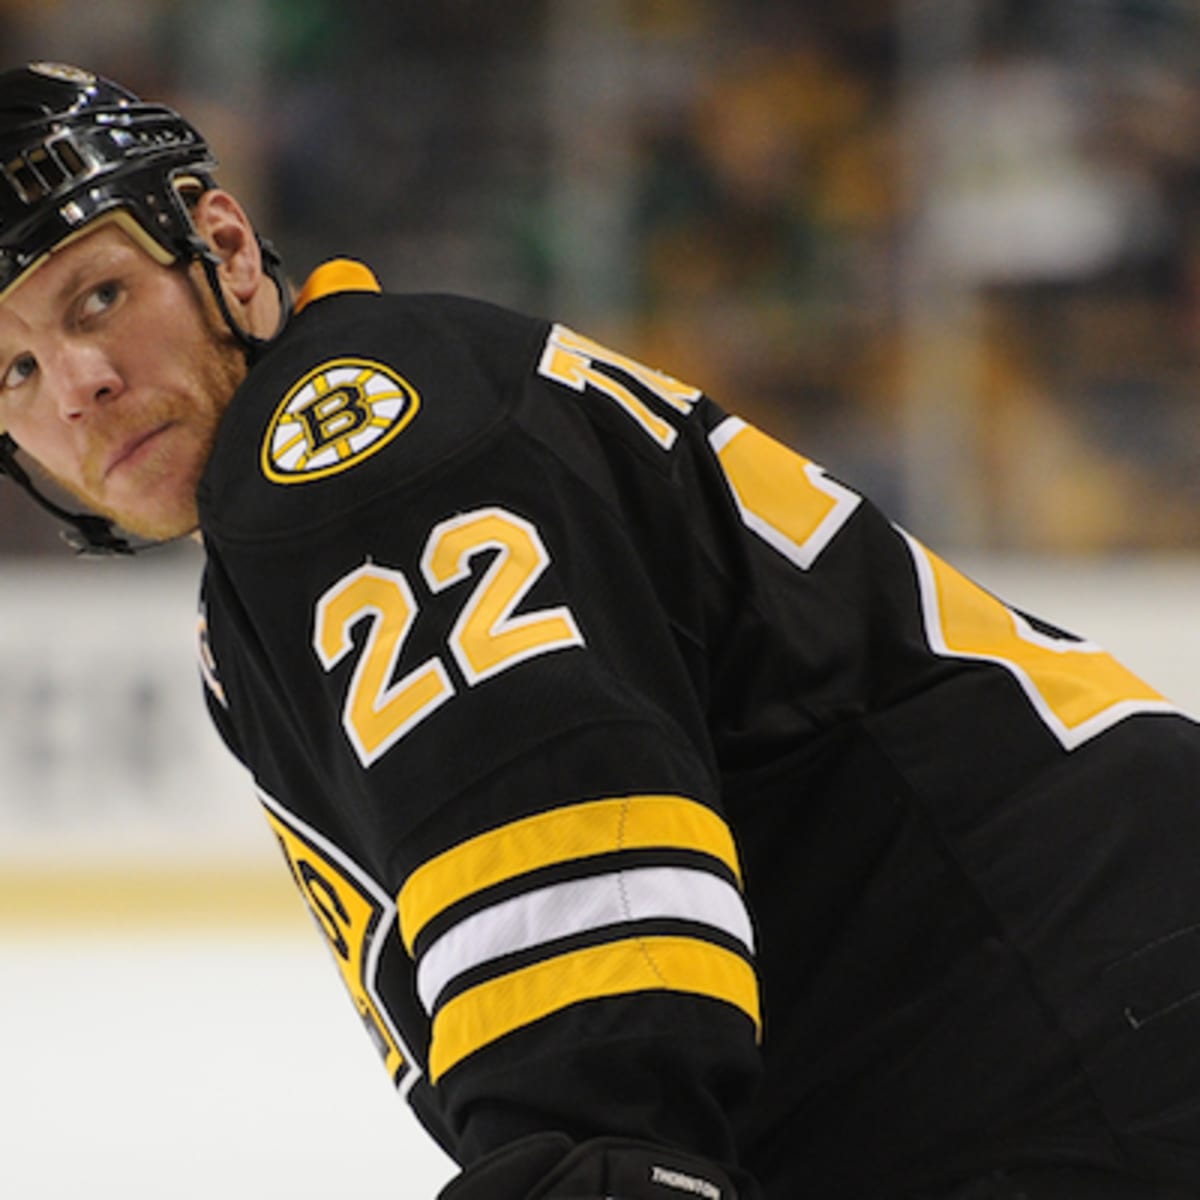 Shawn Thornton, Boston Bruins Part Ways At Right Time For Both